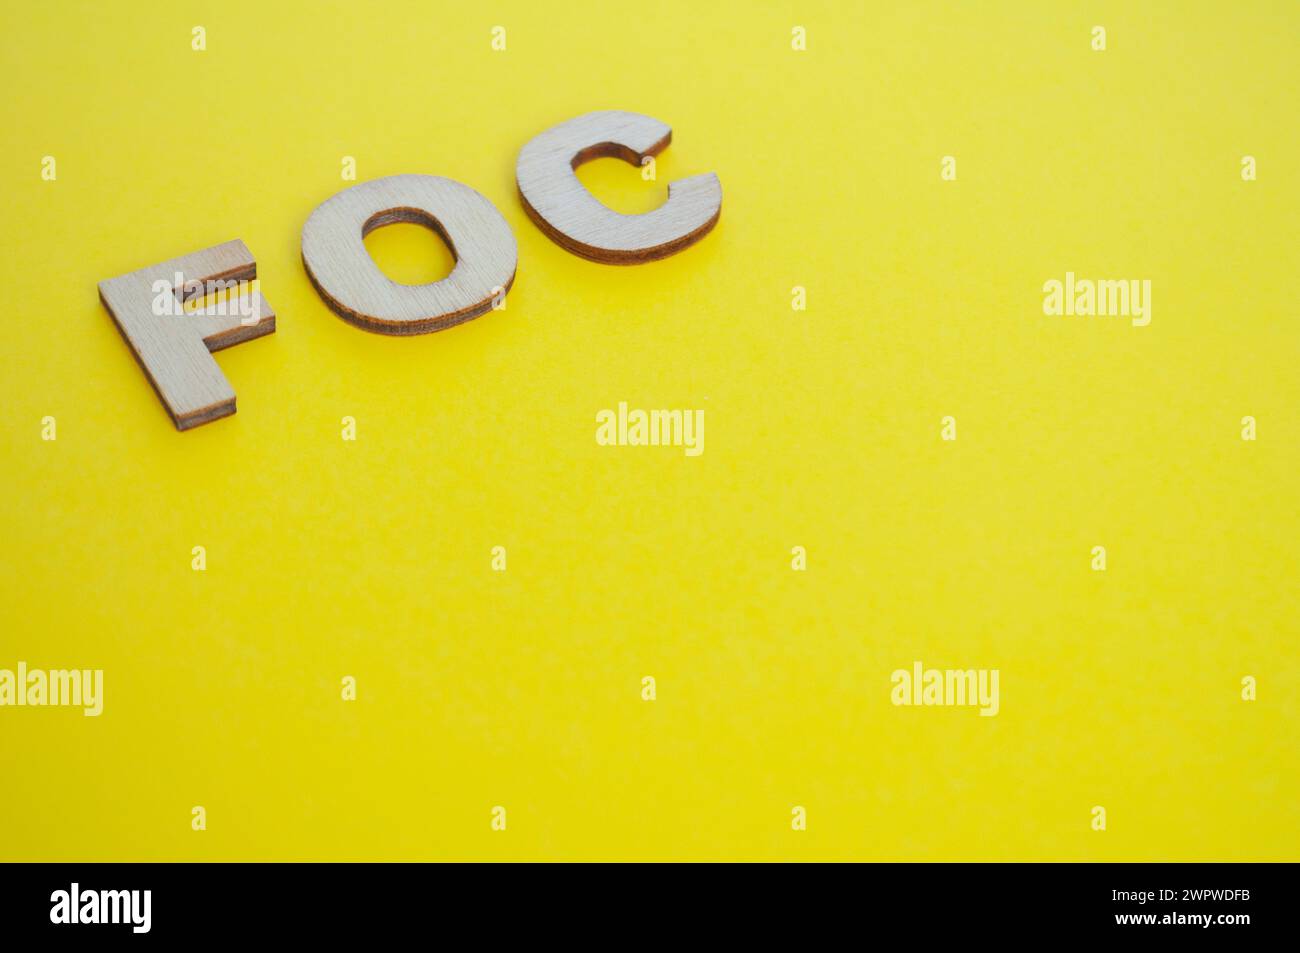 FOC wooden letters representing Free Of Charge on yellow background. Stock Photo